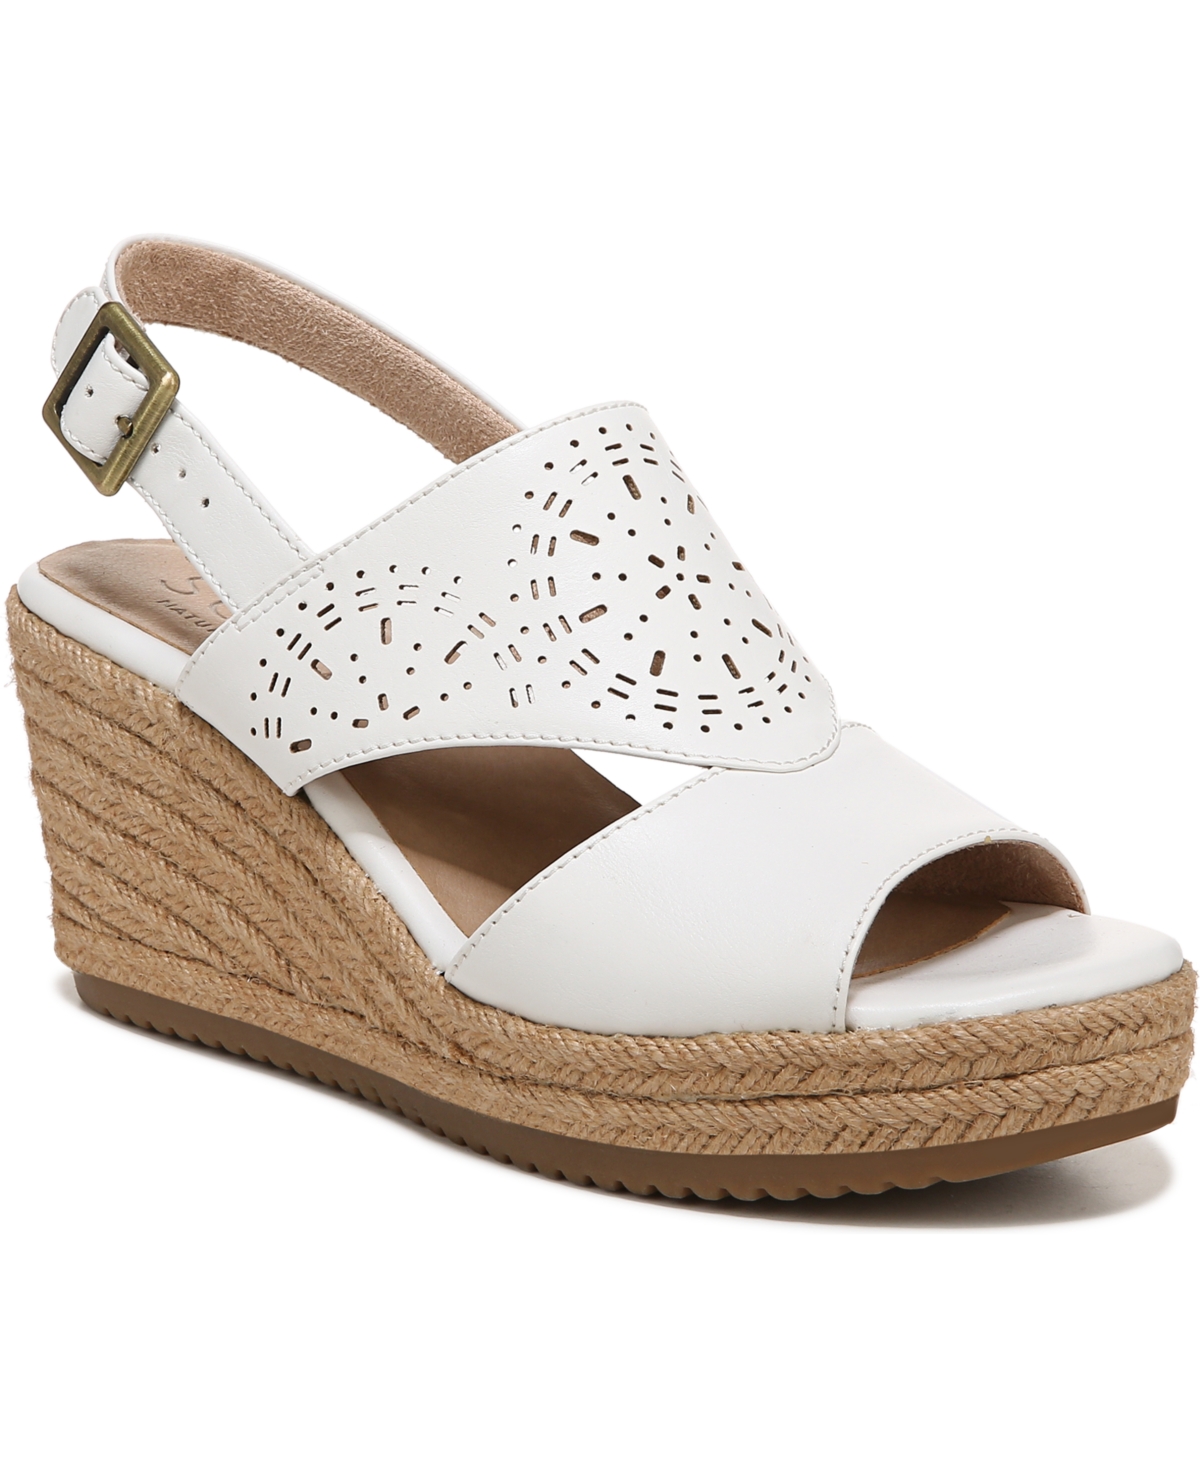 Soul Naturalizer Ocean Slingback Wedge Sandals Women's Shoes In White Smooth Faux Leather